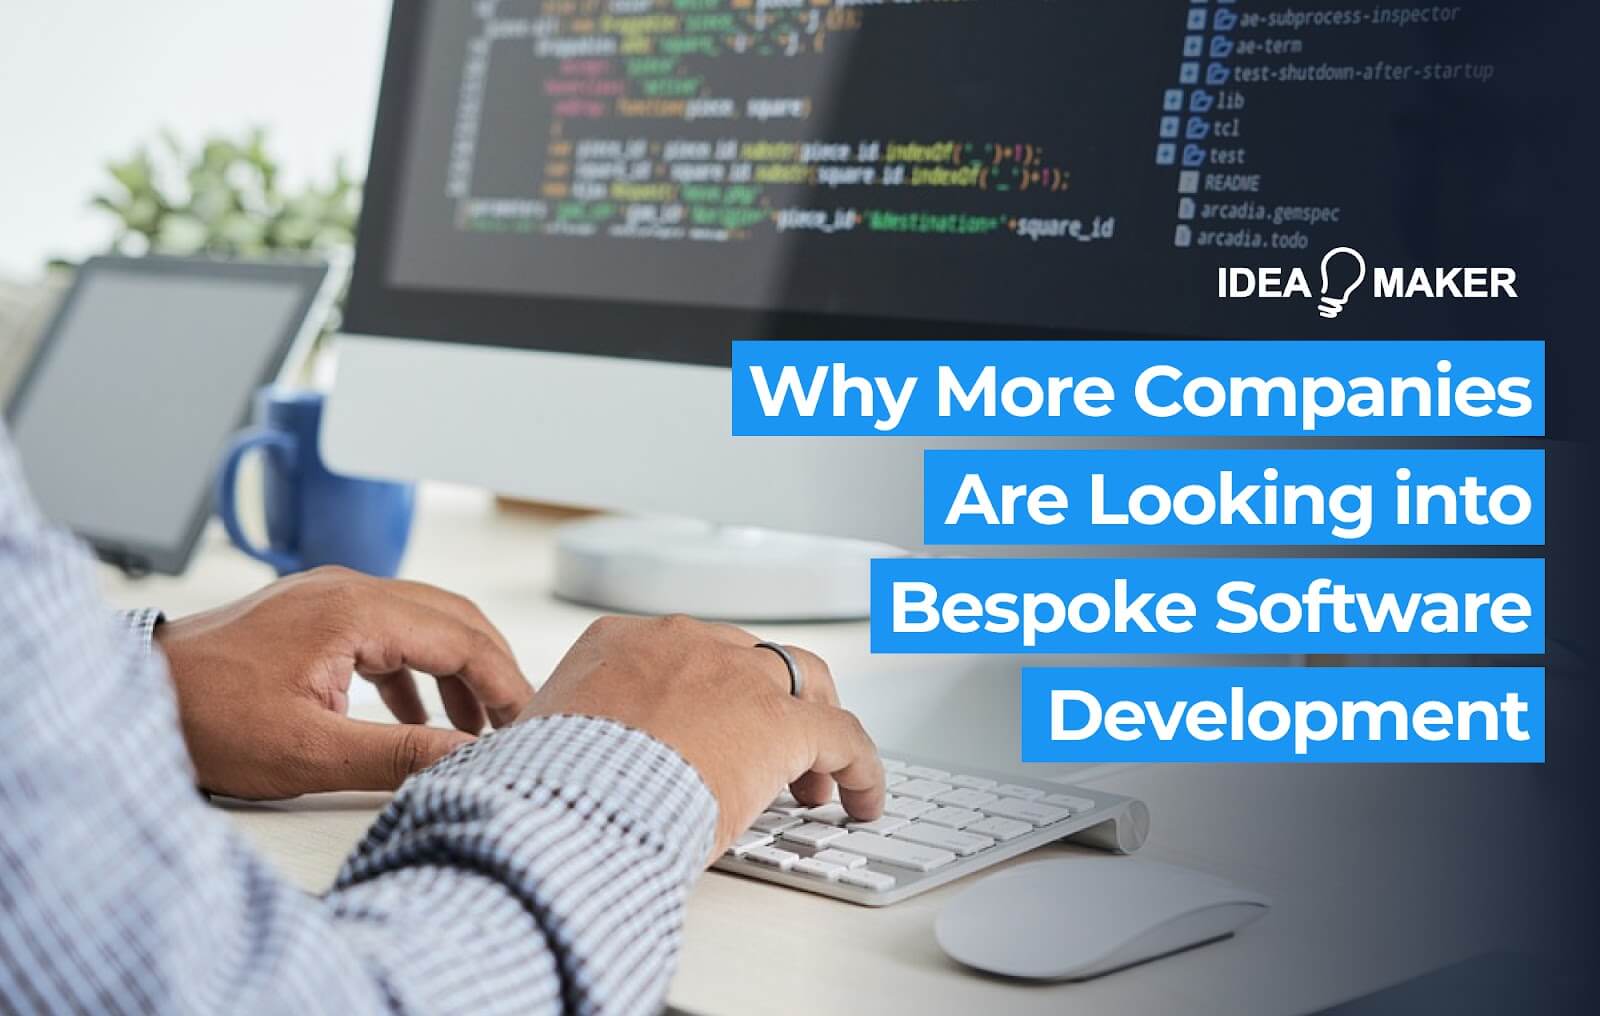 Ideamaker - Why More Companies Are Looking into Bespoke Software Development